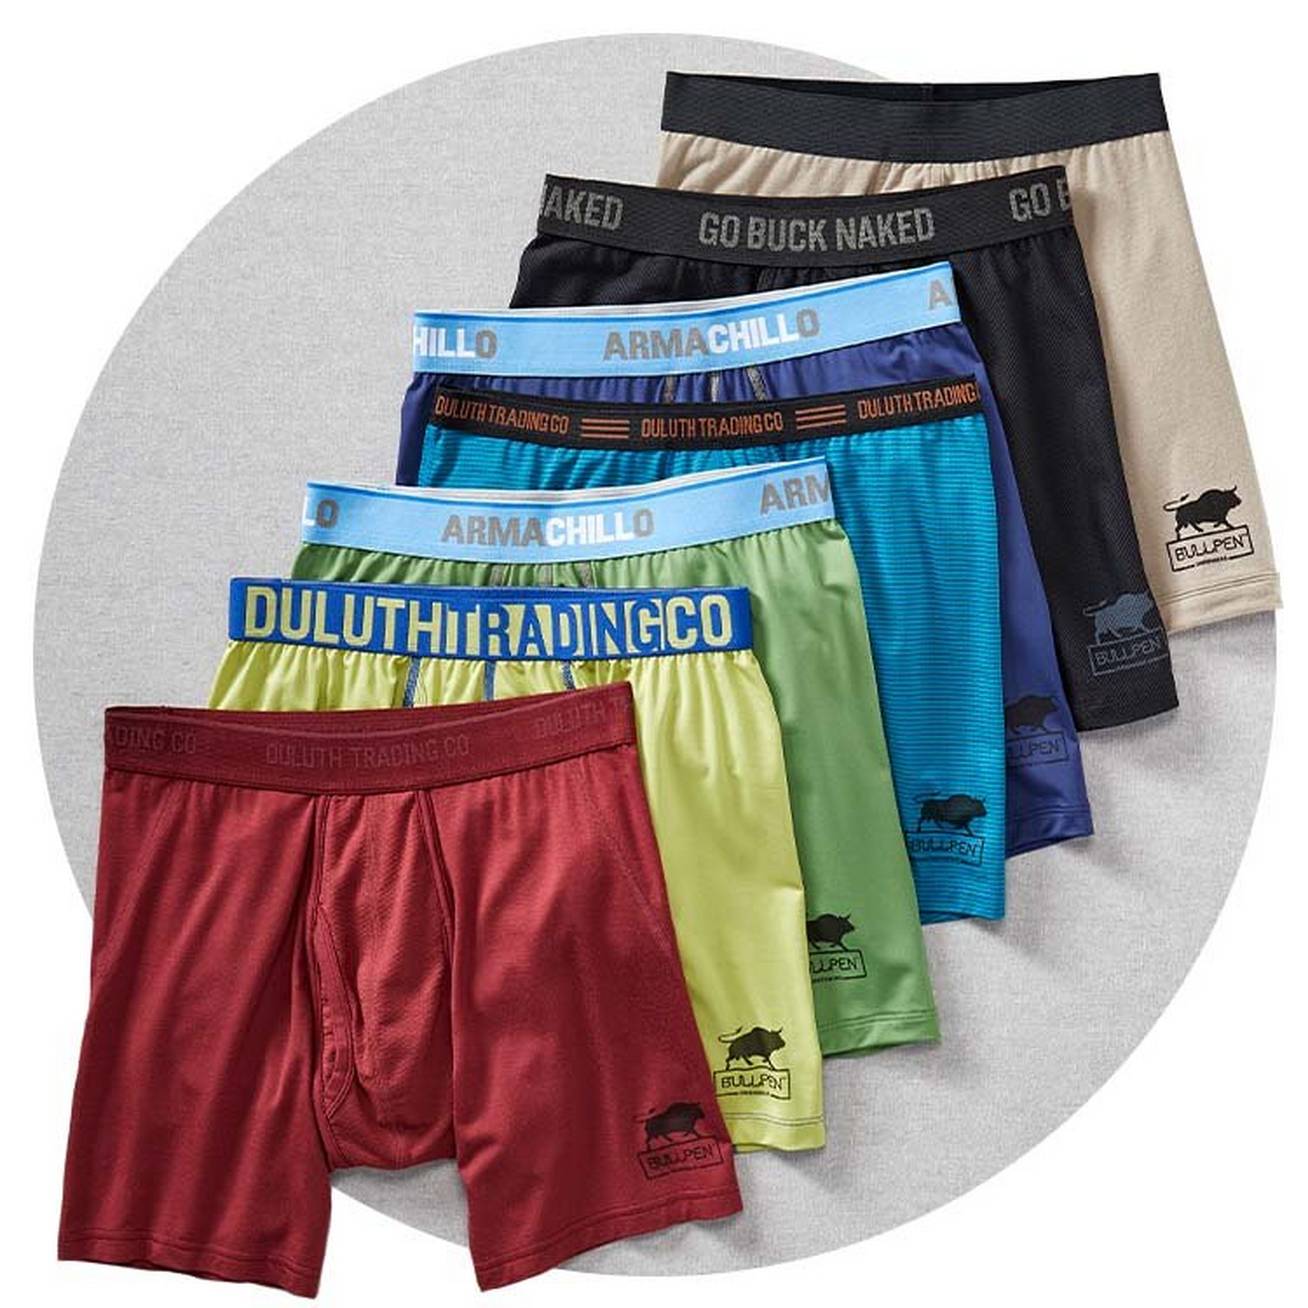 seven pairs of men's bullpen underwear in different colors and fabrications